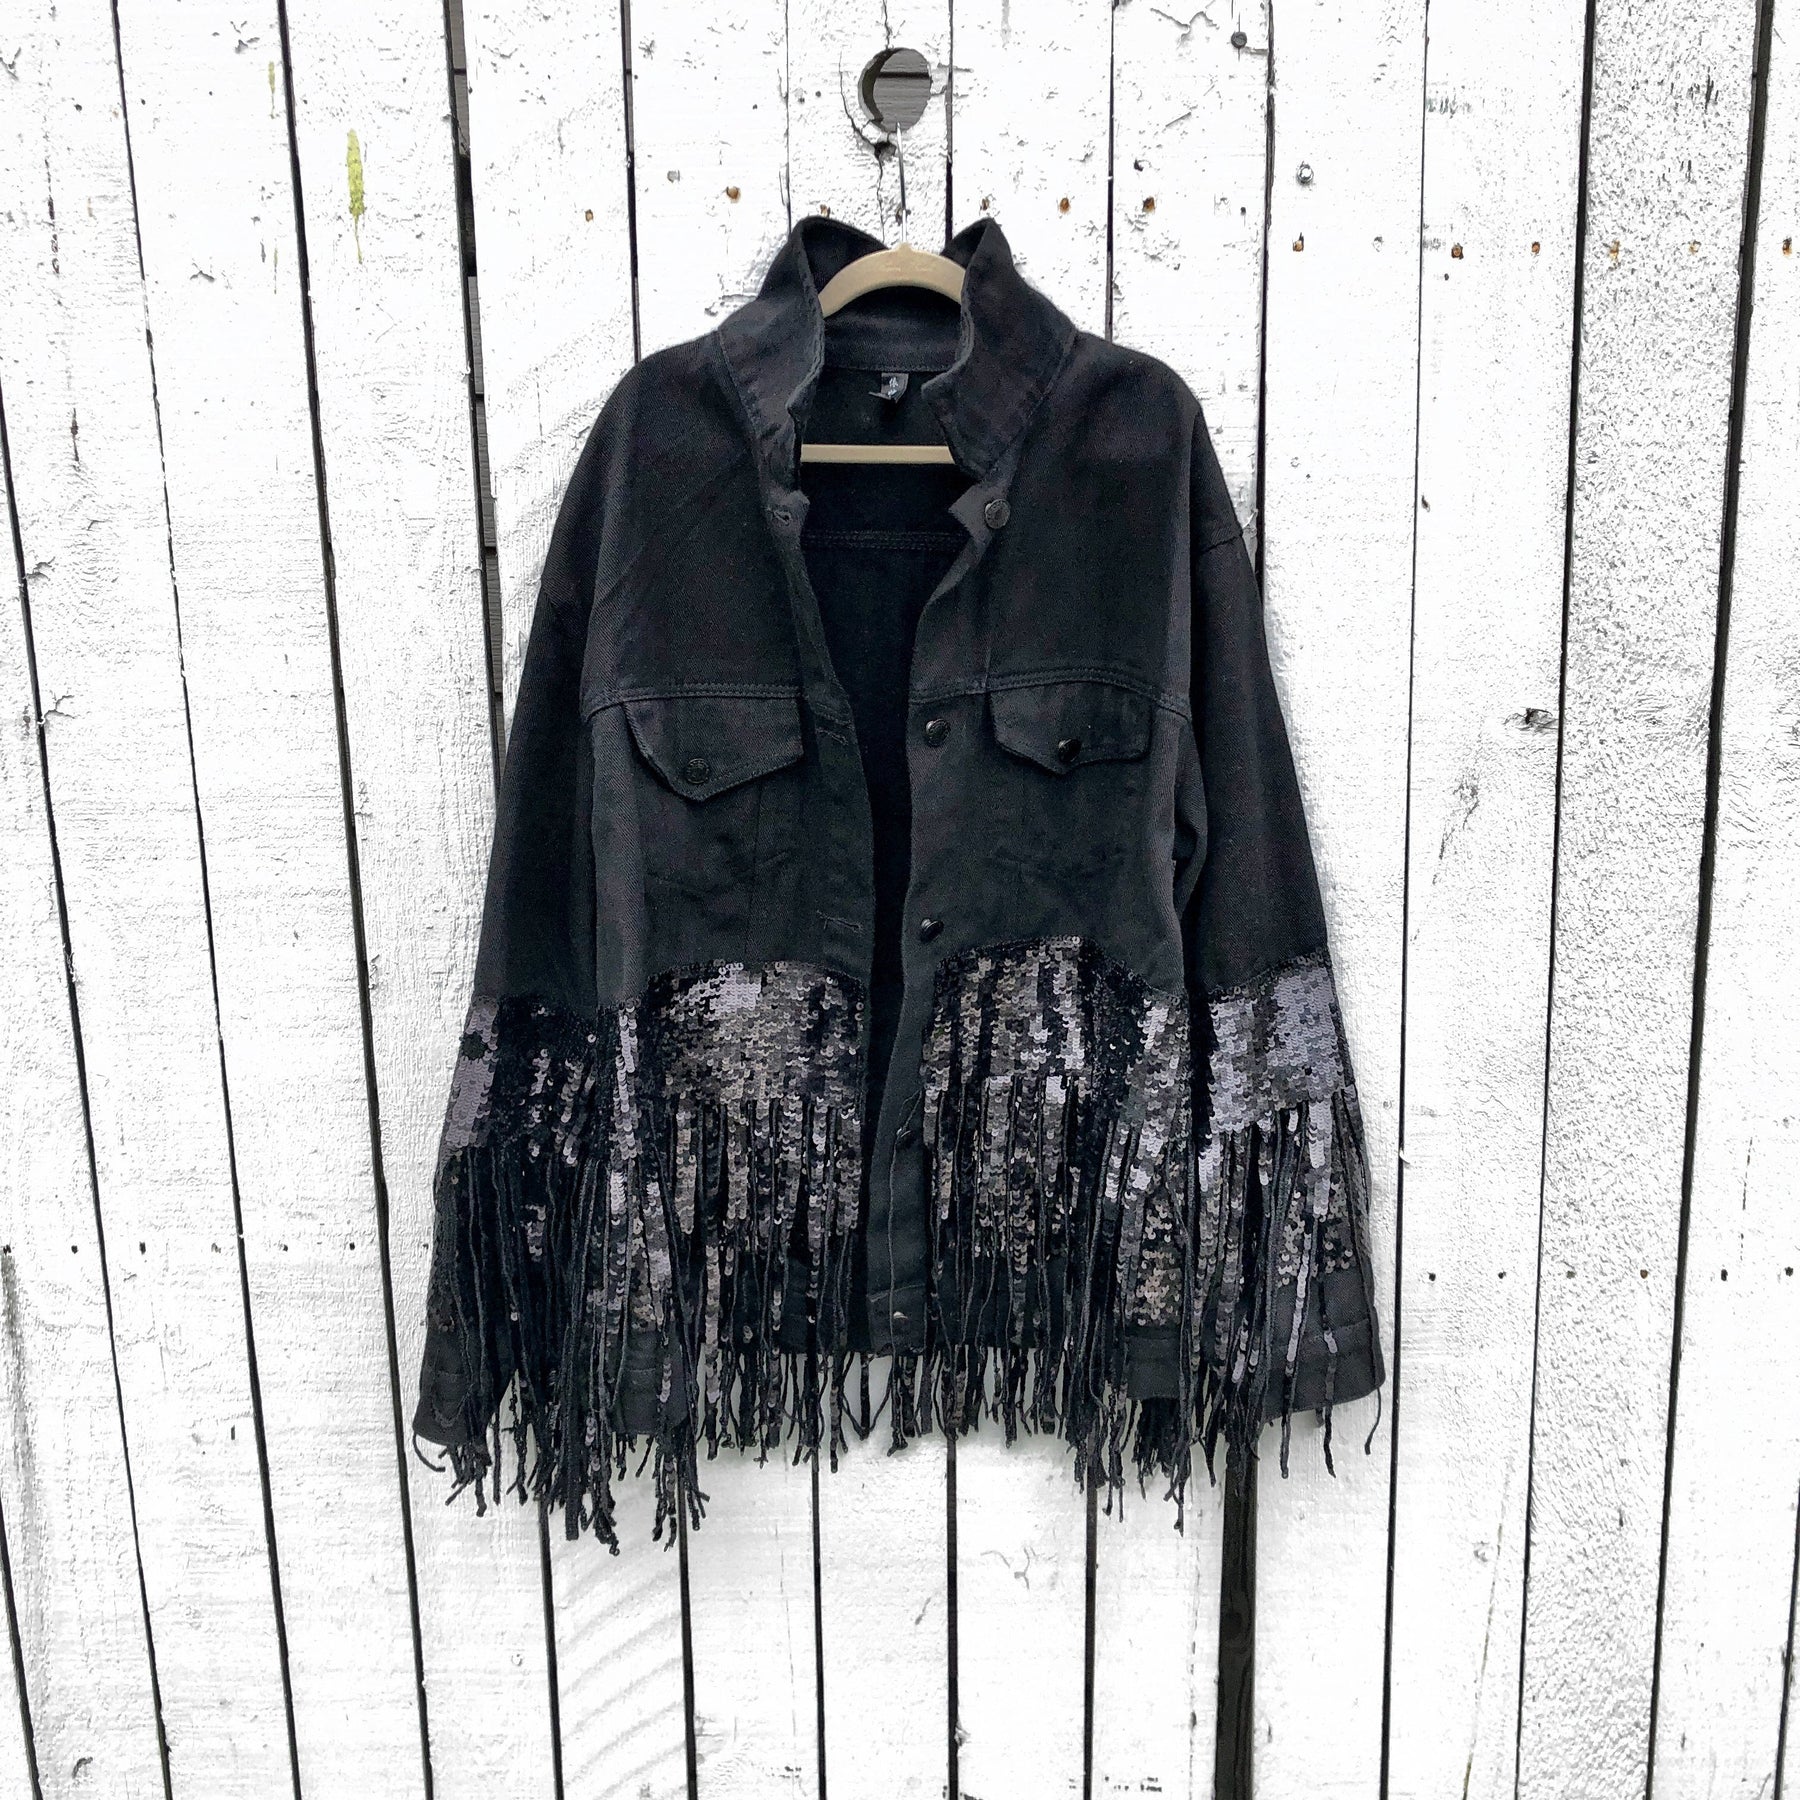 Black denim jacket with black sequin fringes hanging off on bottom half of jacket, and below elbows, Positive motivation painted in black, over white base, on back. Inspired by resolutions for 2020. Signed @wrenandglory.